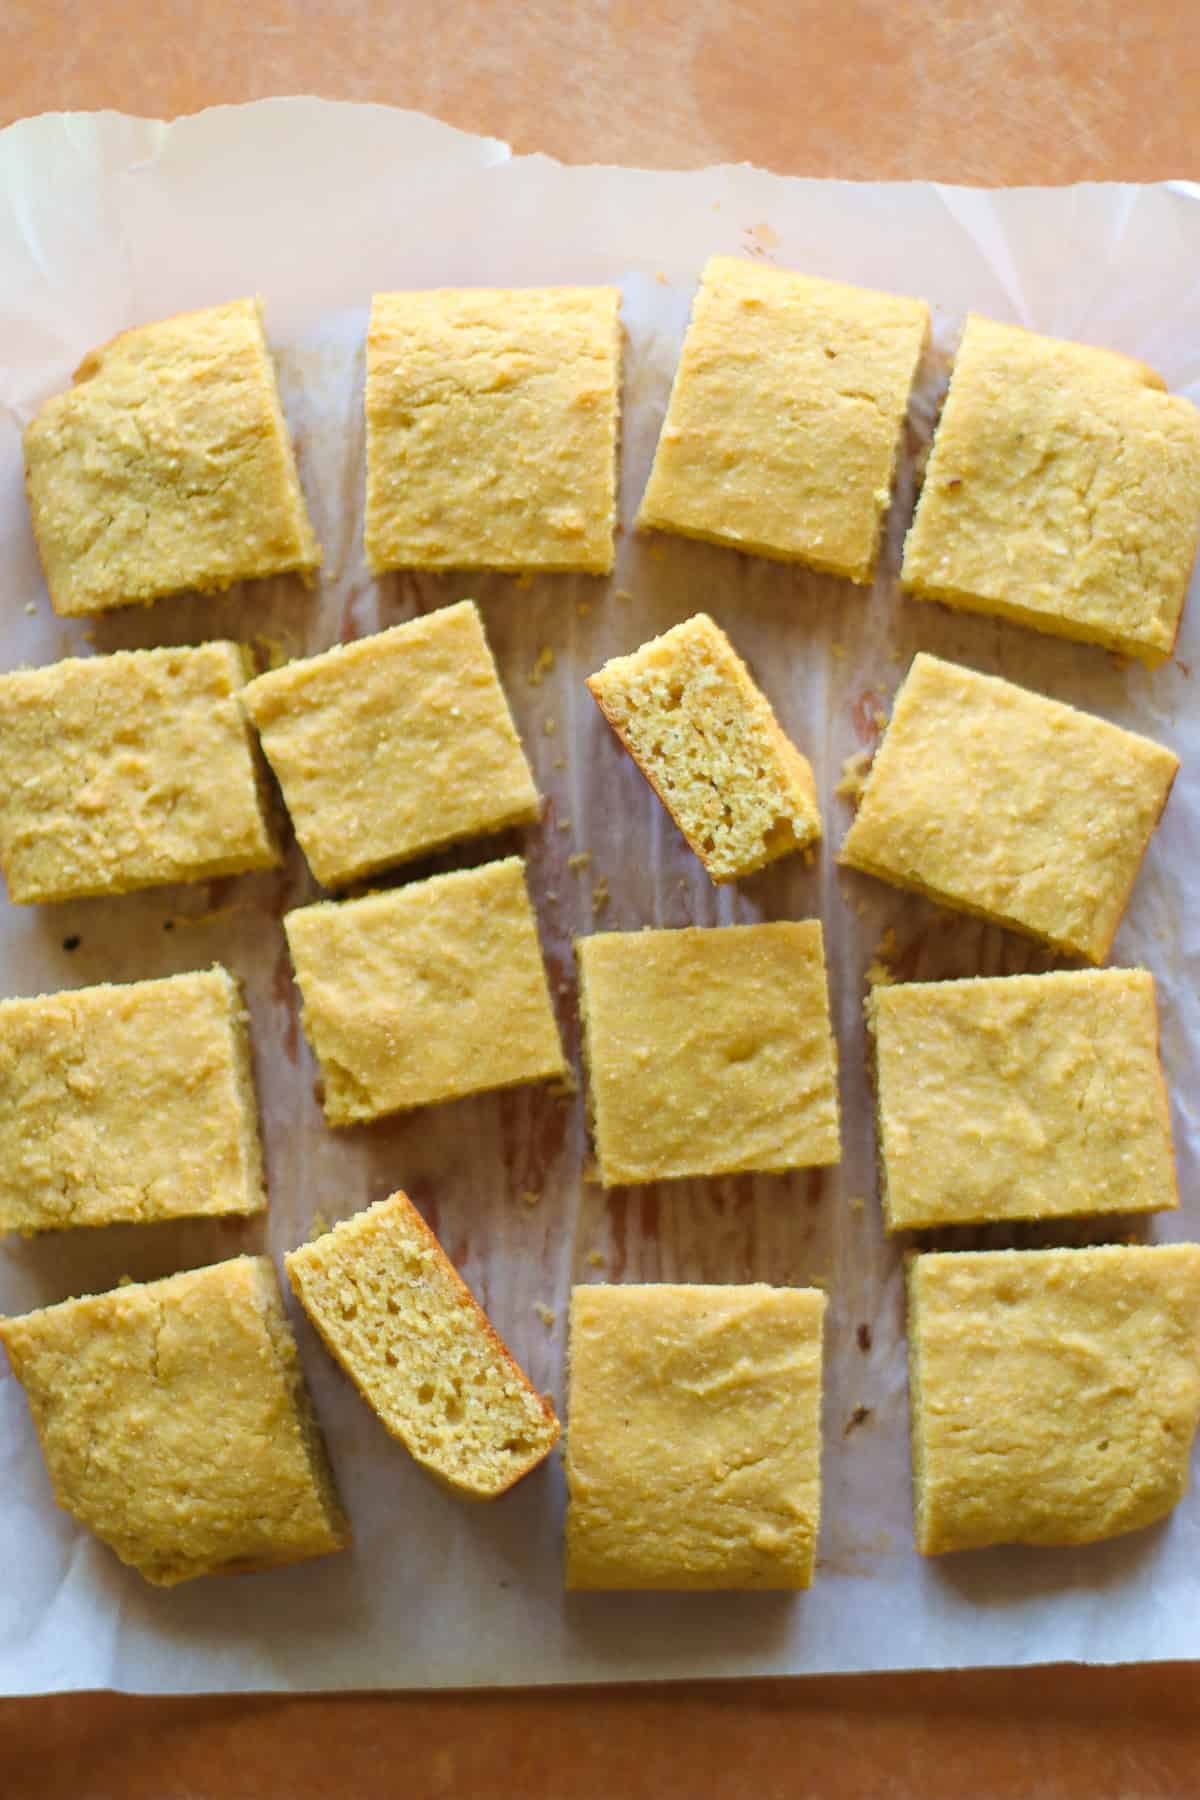 Baked and sliced cornbread on a wooden board.